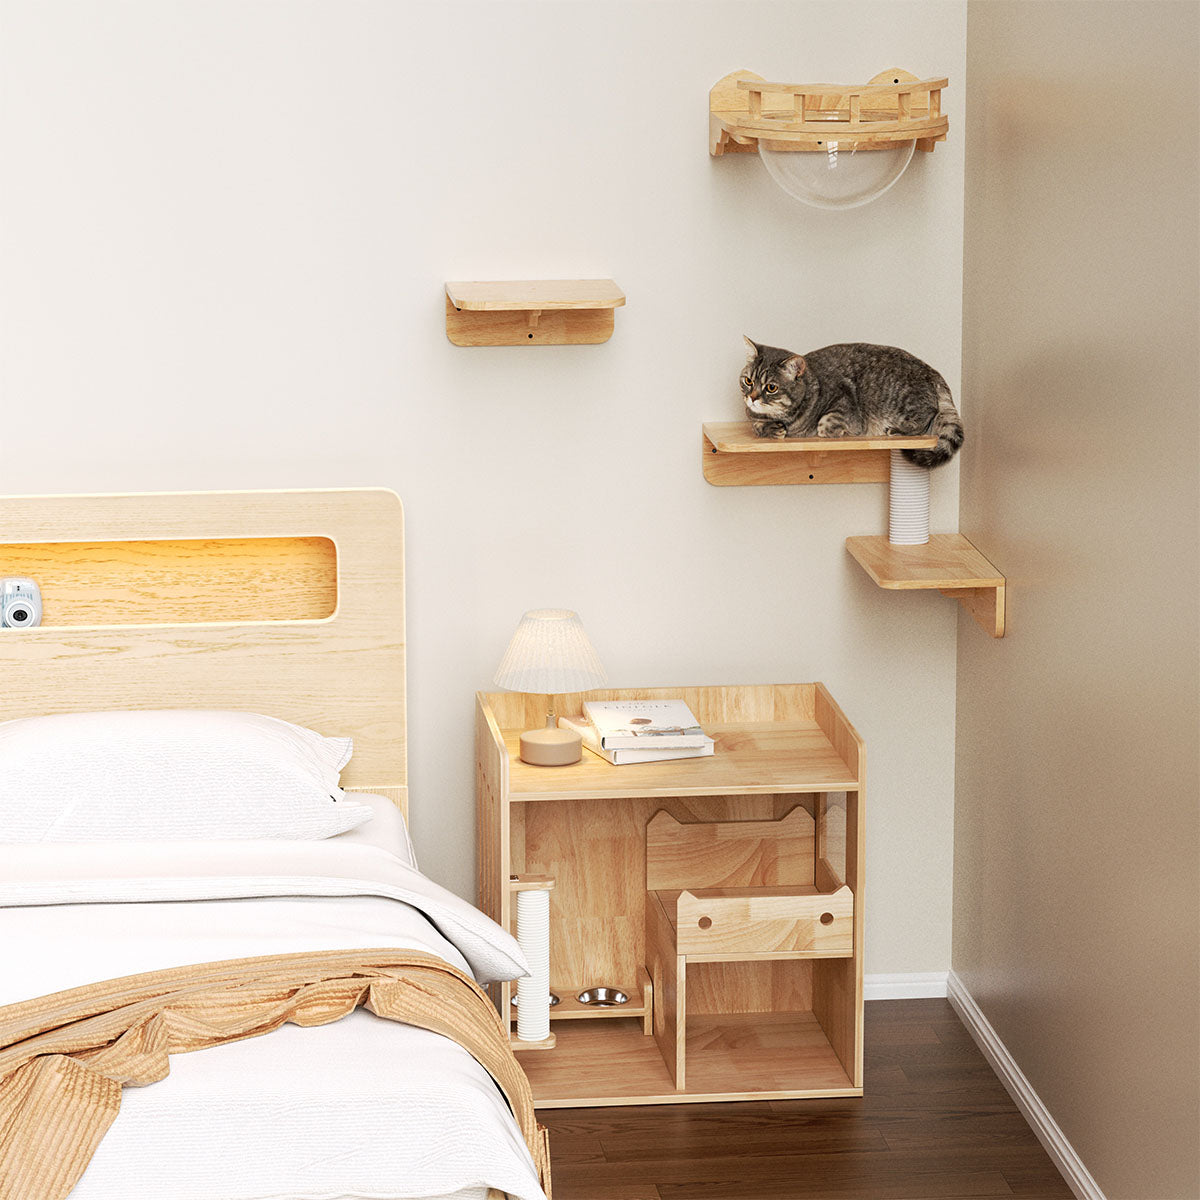 Home Decor: Cat (Wall) House